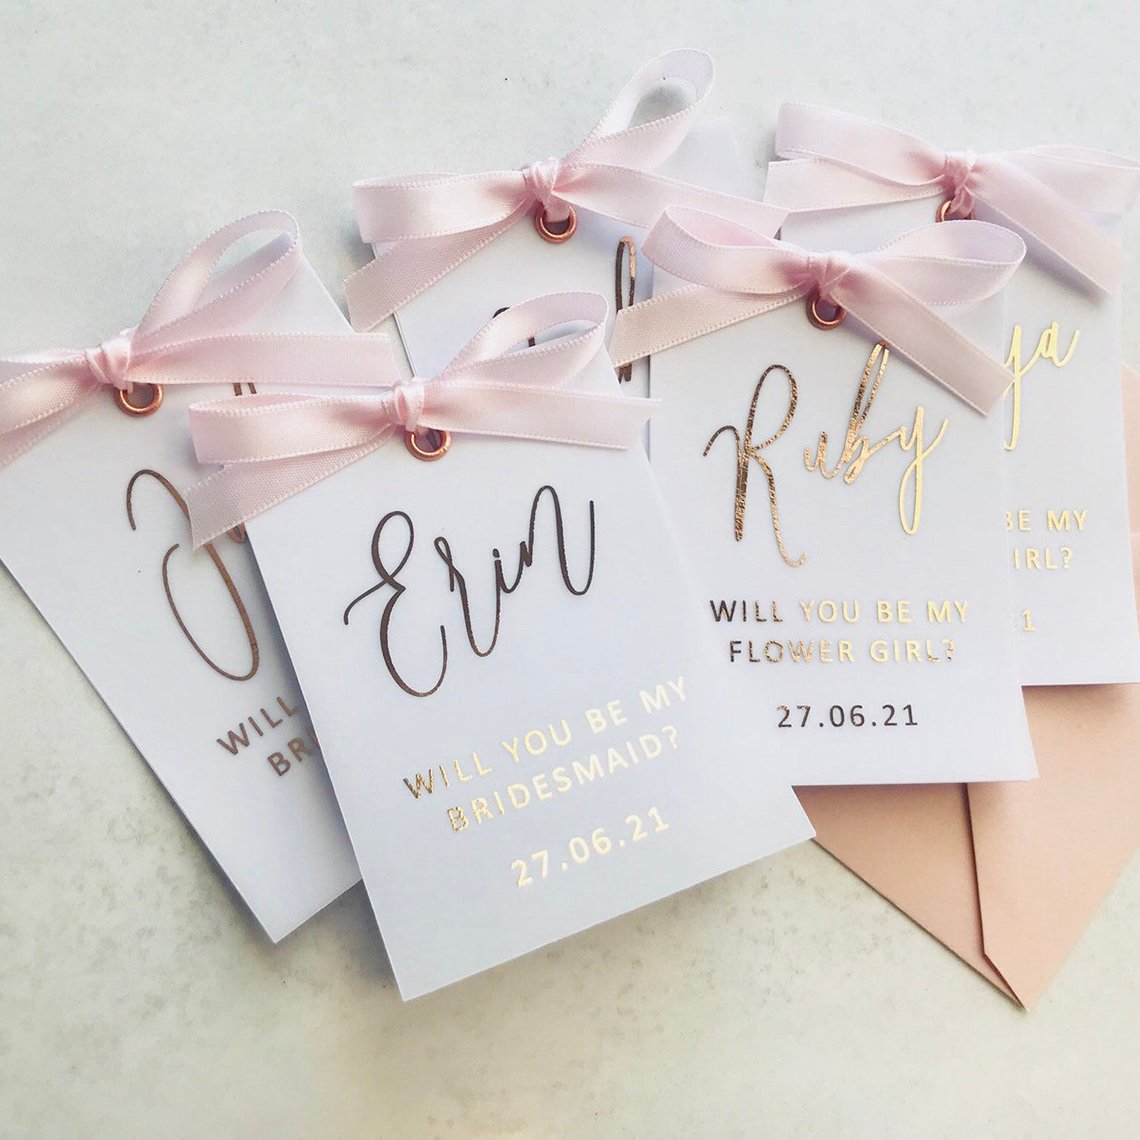 The Best Will You Be My Bridesmaid Cards Bridal Musings 2 - 20 tấm thiệp "Will You Be My Bridesmaid" hay nhất